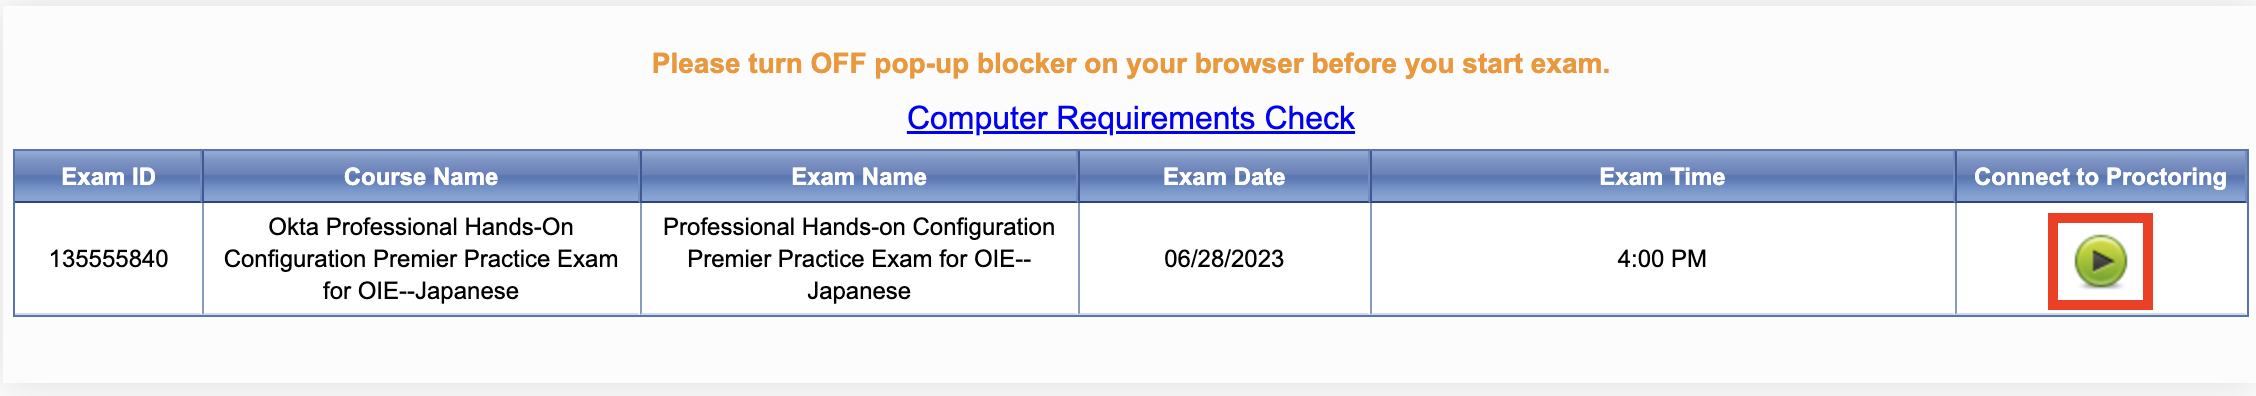 Image of the Exams Portal, featuring the Computer Requirements Check with a focus on the Connect to Proctoring field.